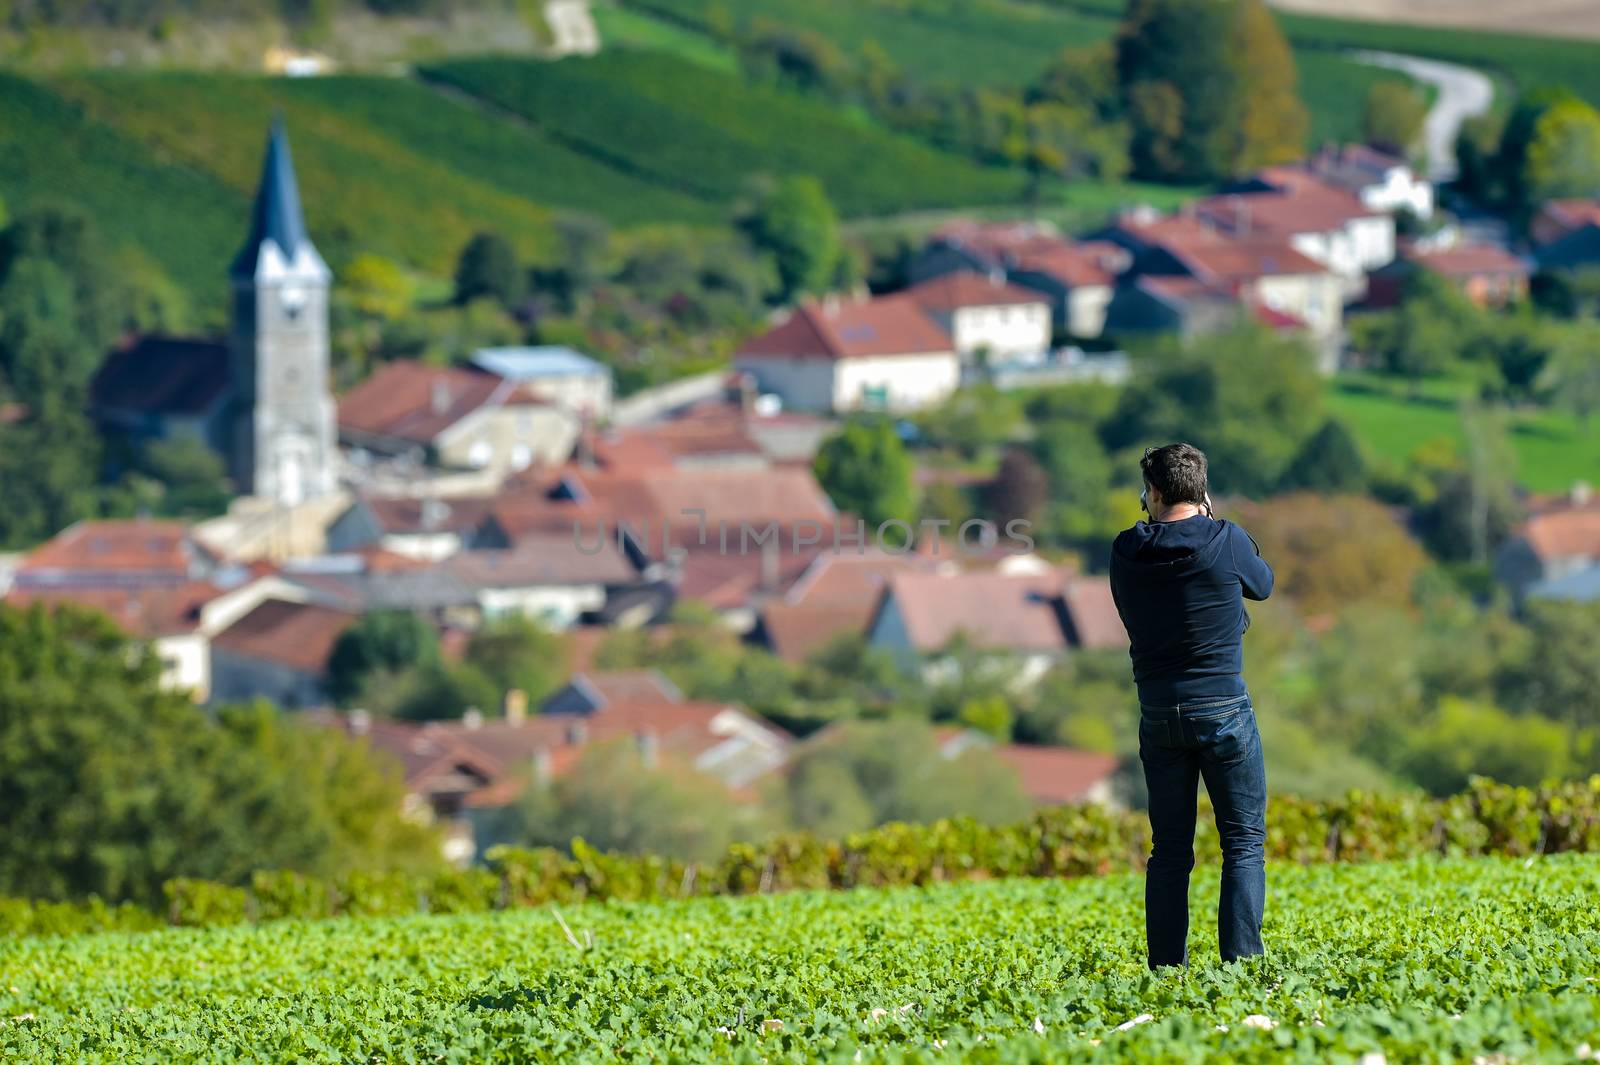 Photographer in action, in Champagne vineyards by FreeProd